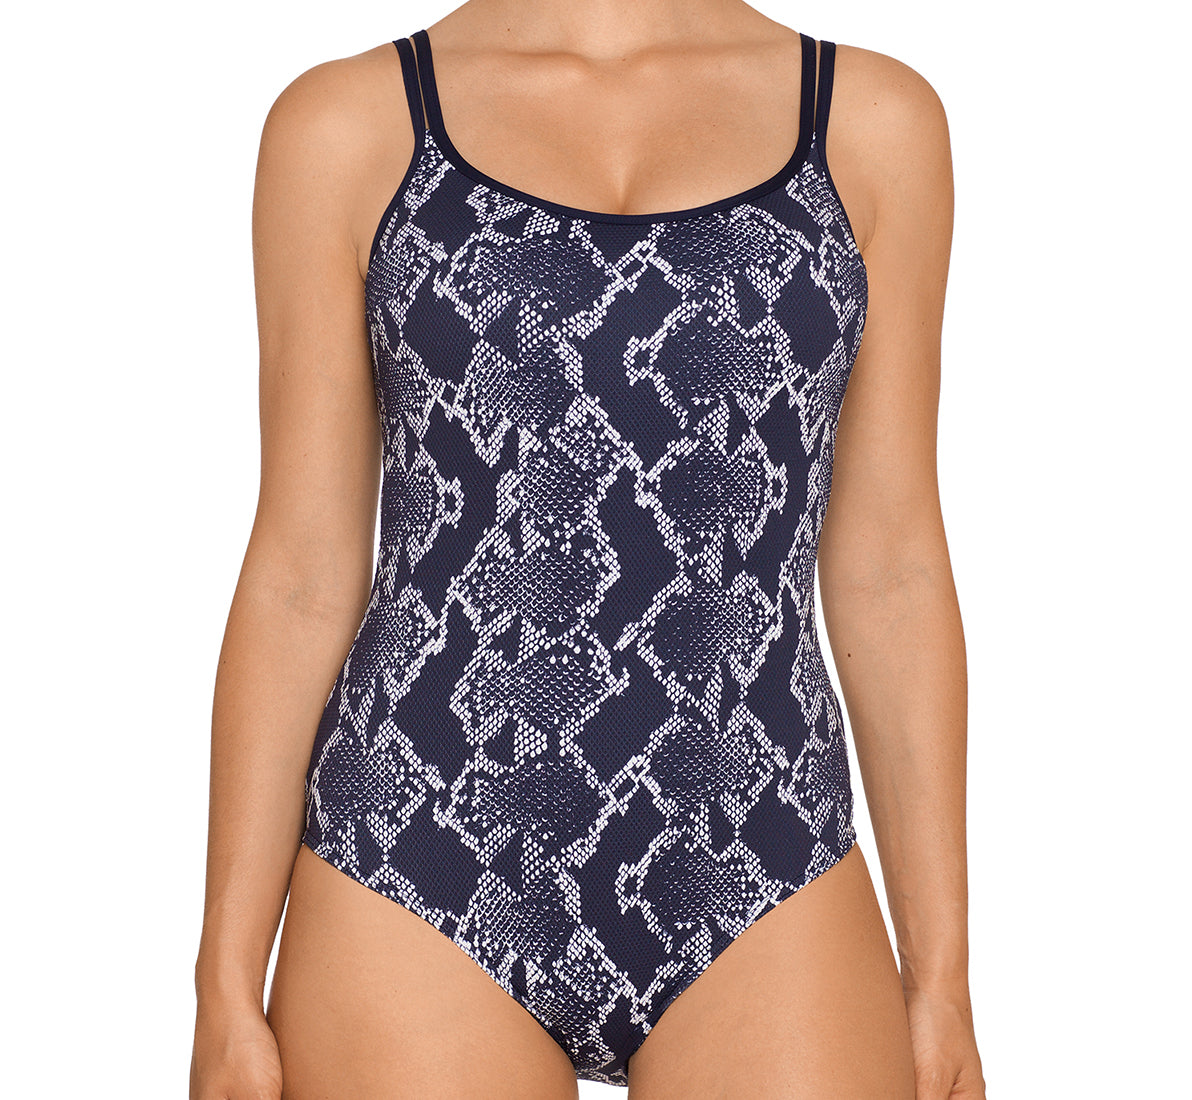 PrimaDonna Kala Padded One Piece Swimsuit (4003938),34G,Water Blue - Water Blue,34G